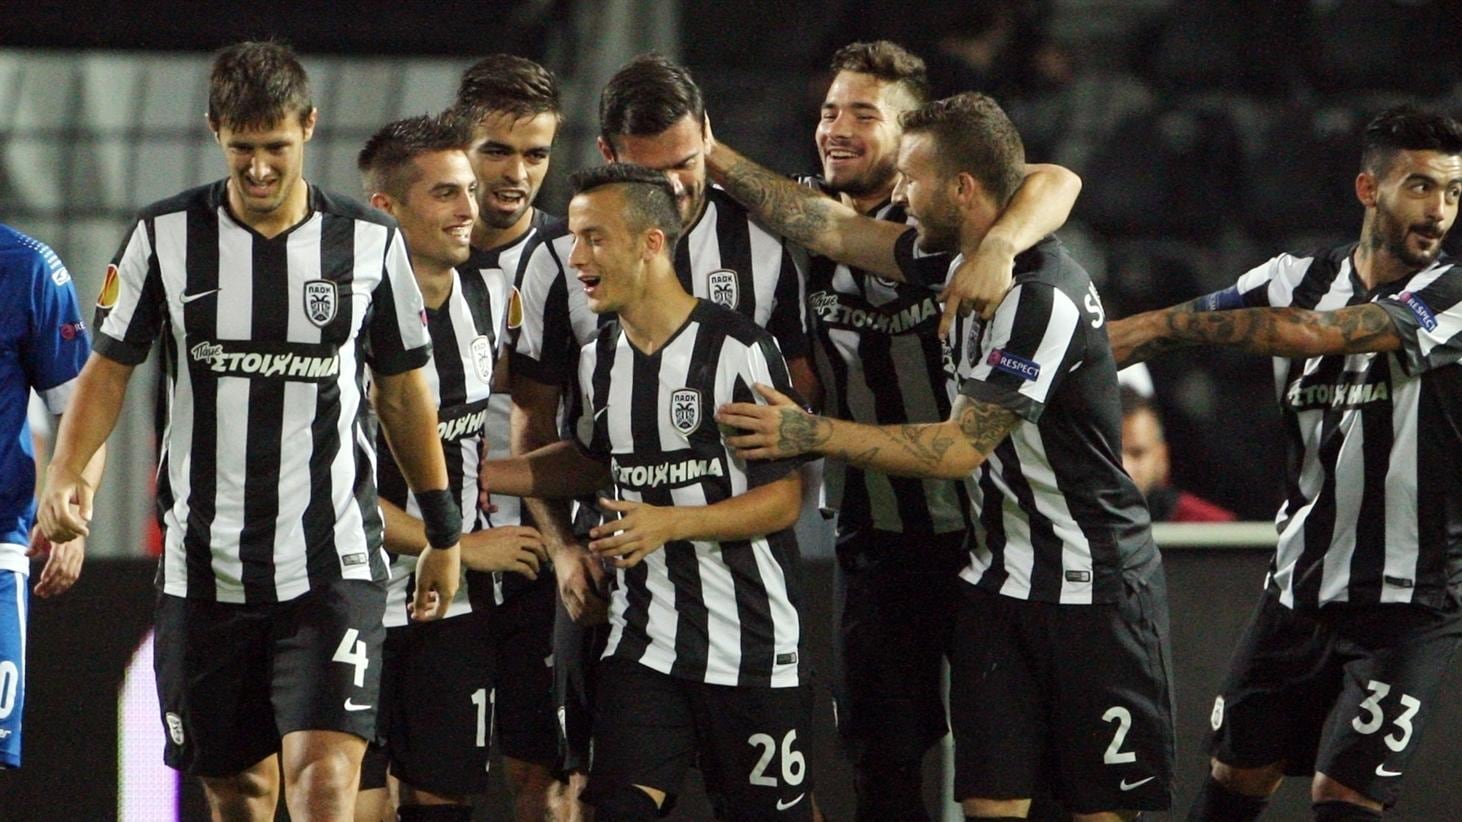 Myths, heroes and legends: PAOK in focus | UEFA Europa League | UEFA.com